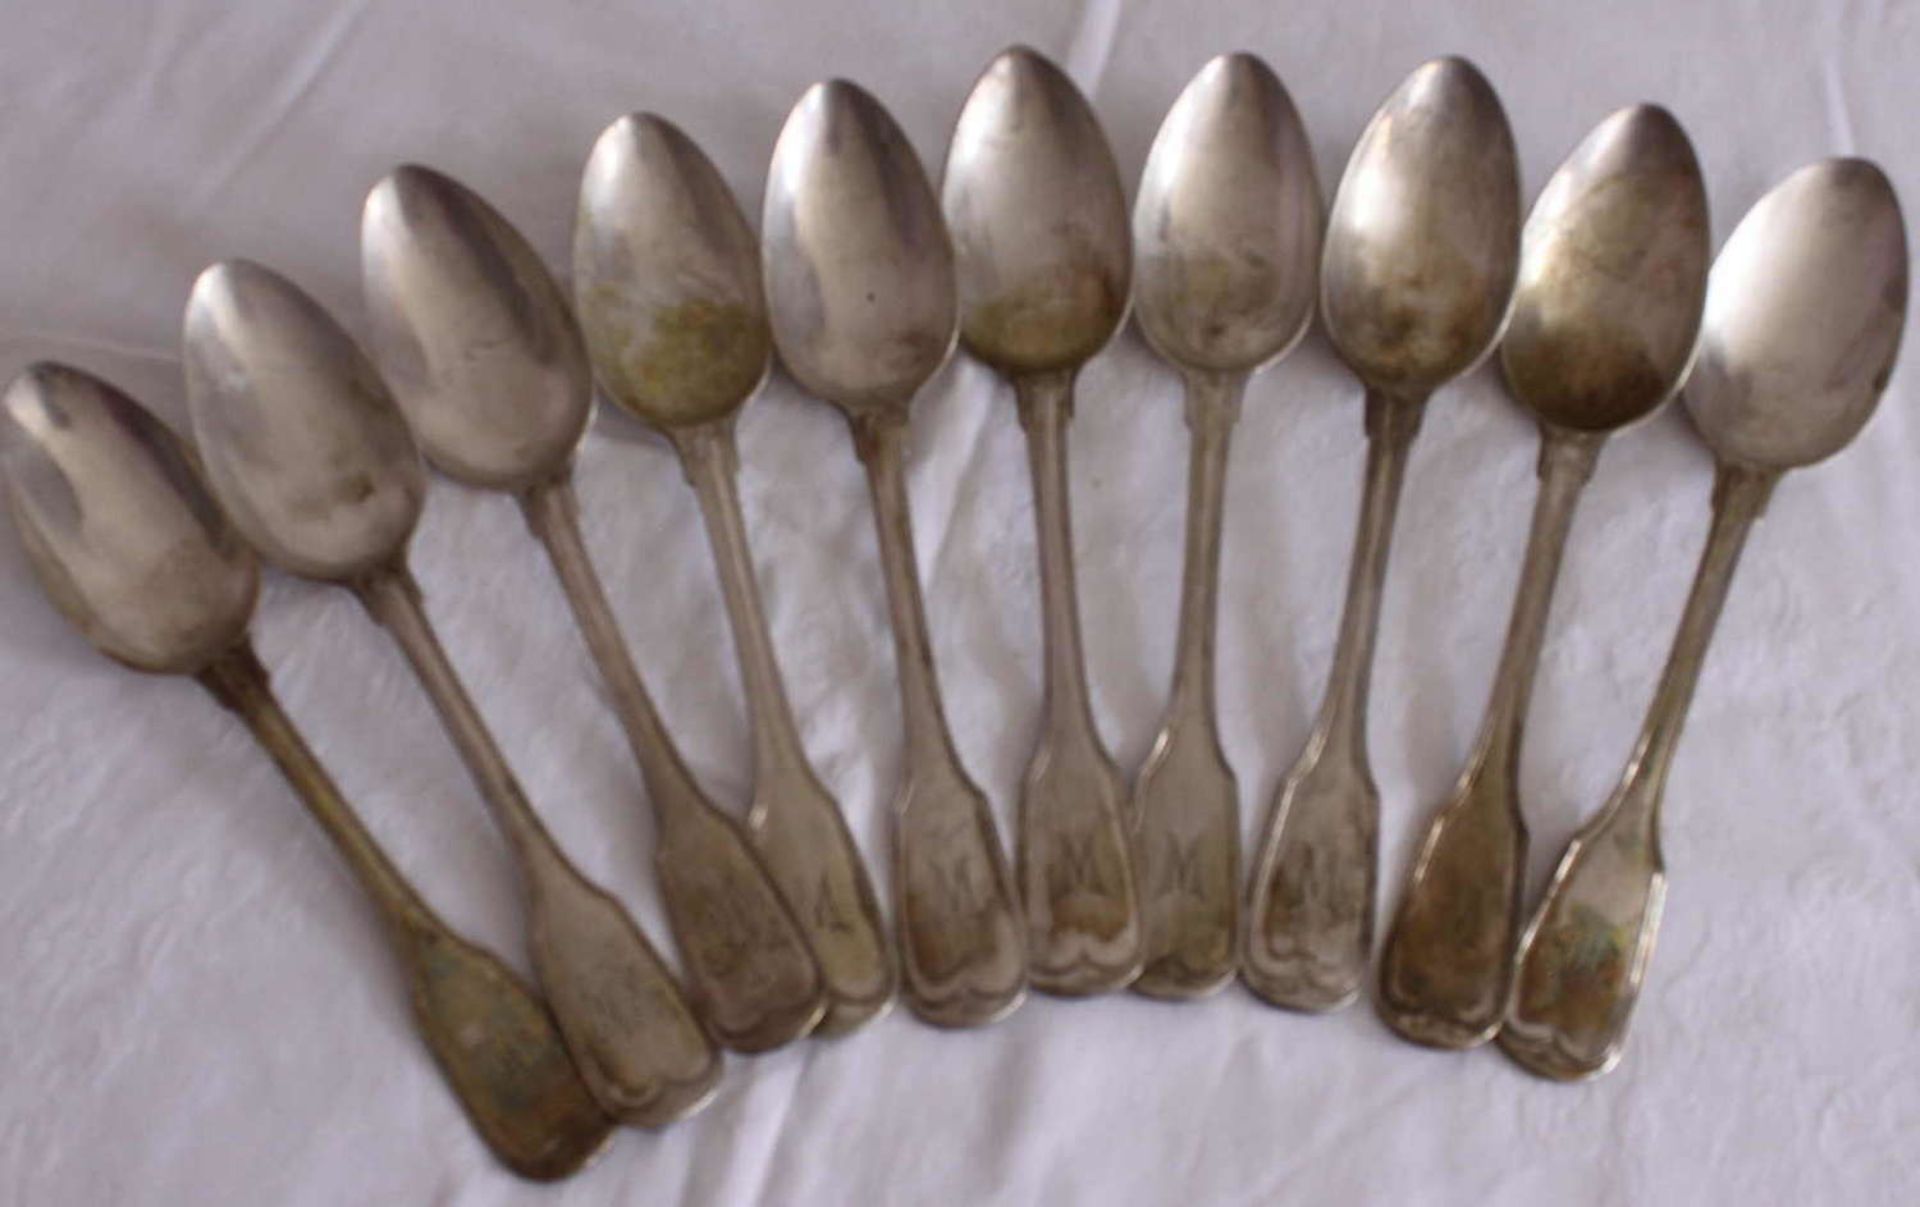 10 soup spoons, 800 silver, same series. With the monogram "M". Total weight about 700 gr - Image 2 of 2